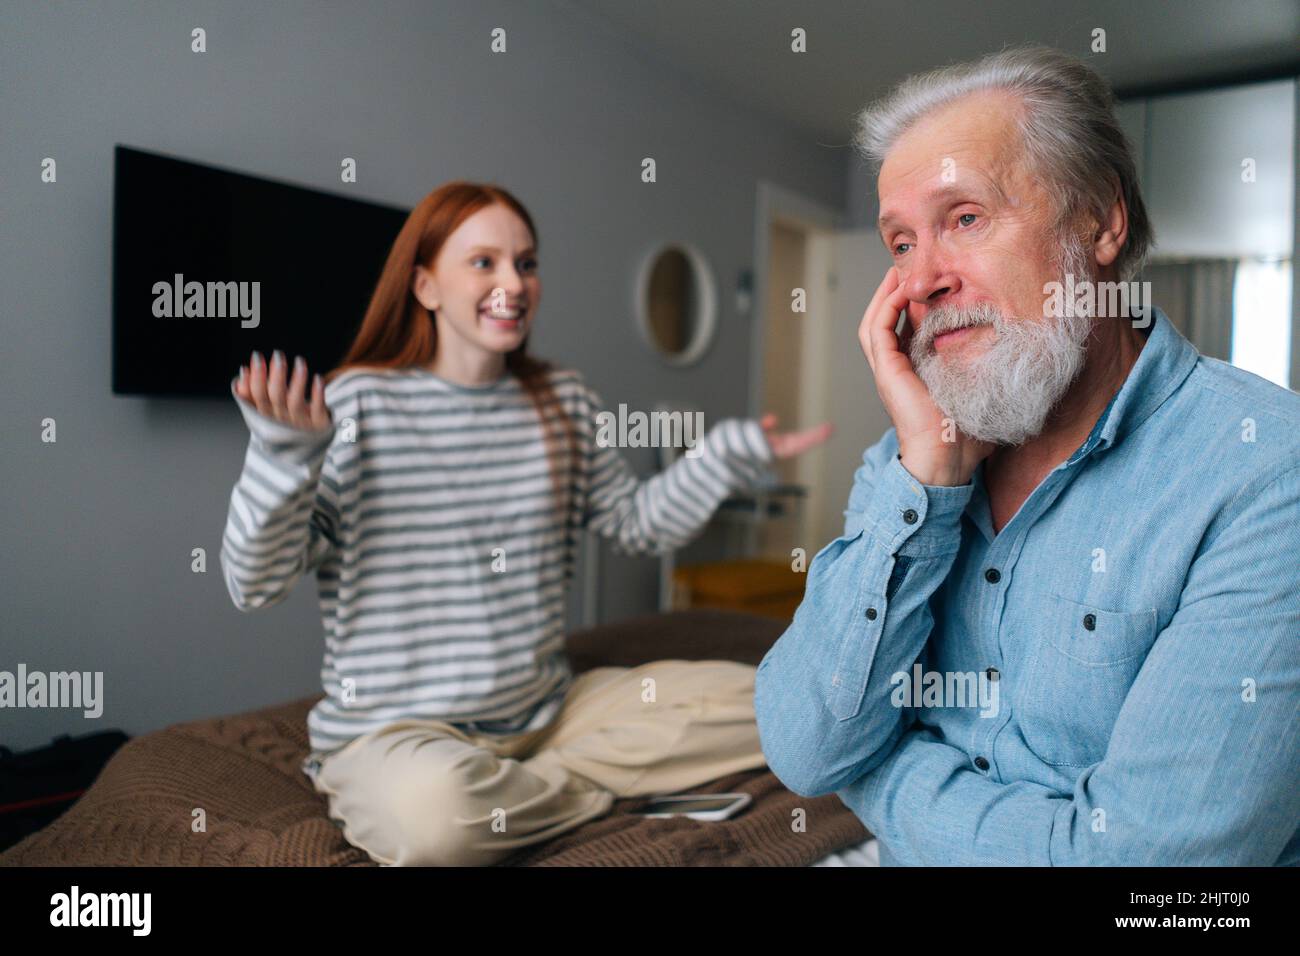 Cheerful young woman and mature male having fun, enjoying leisure time, sharing news at home. Stock Photo